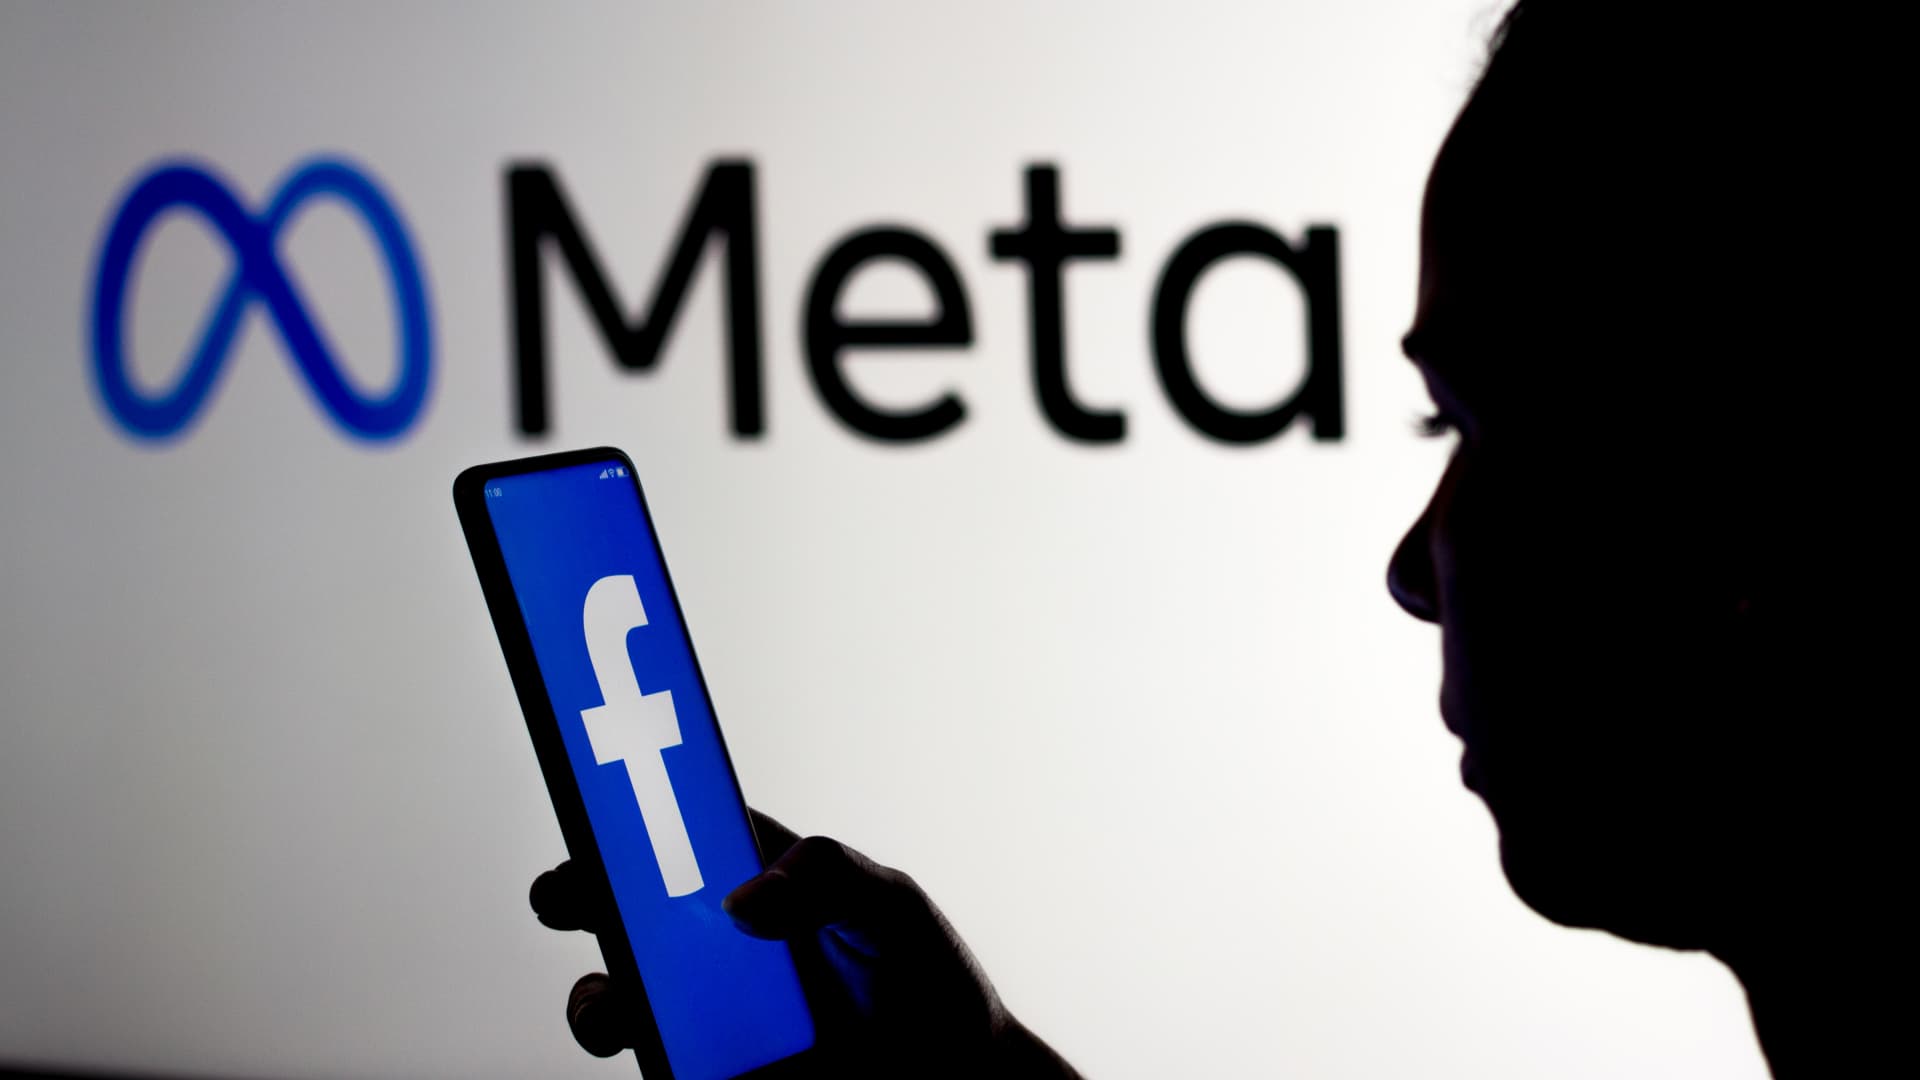 Facebook parent Meta agrees to pay 5 million to settle privacy lawsuit